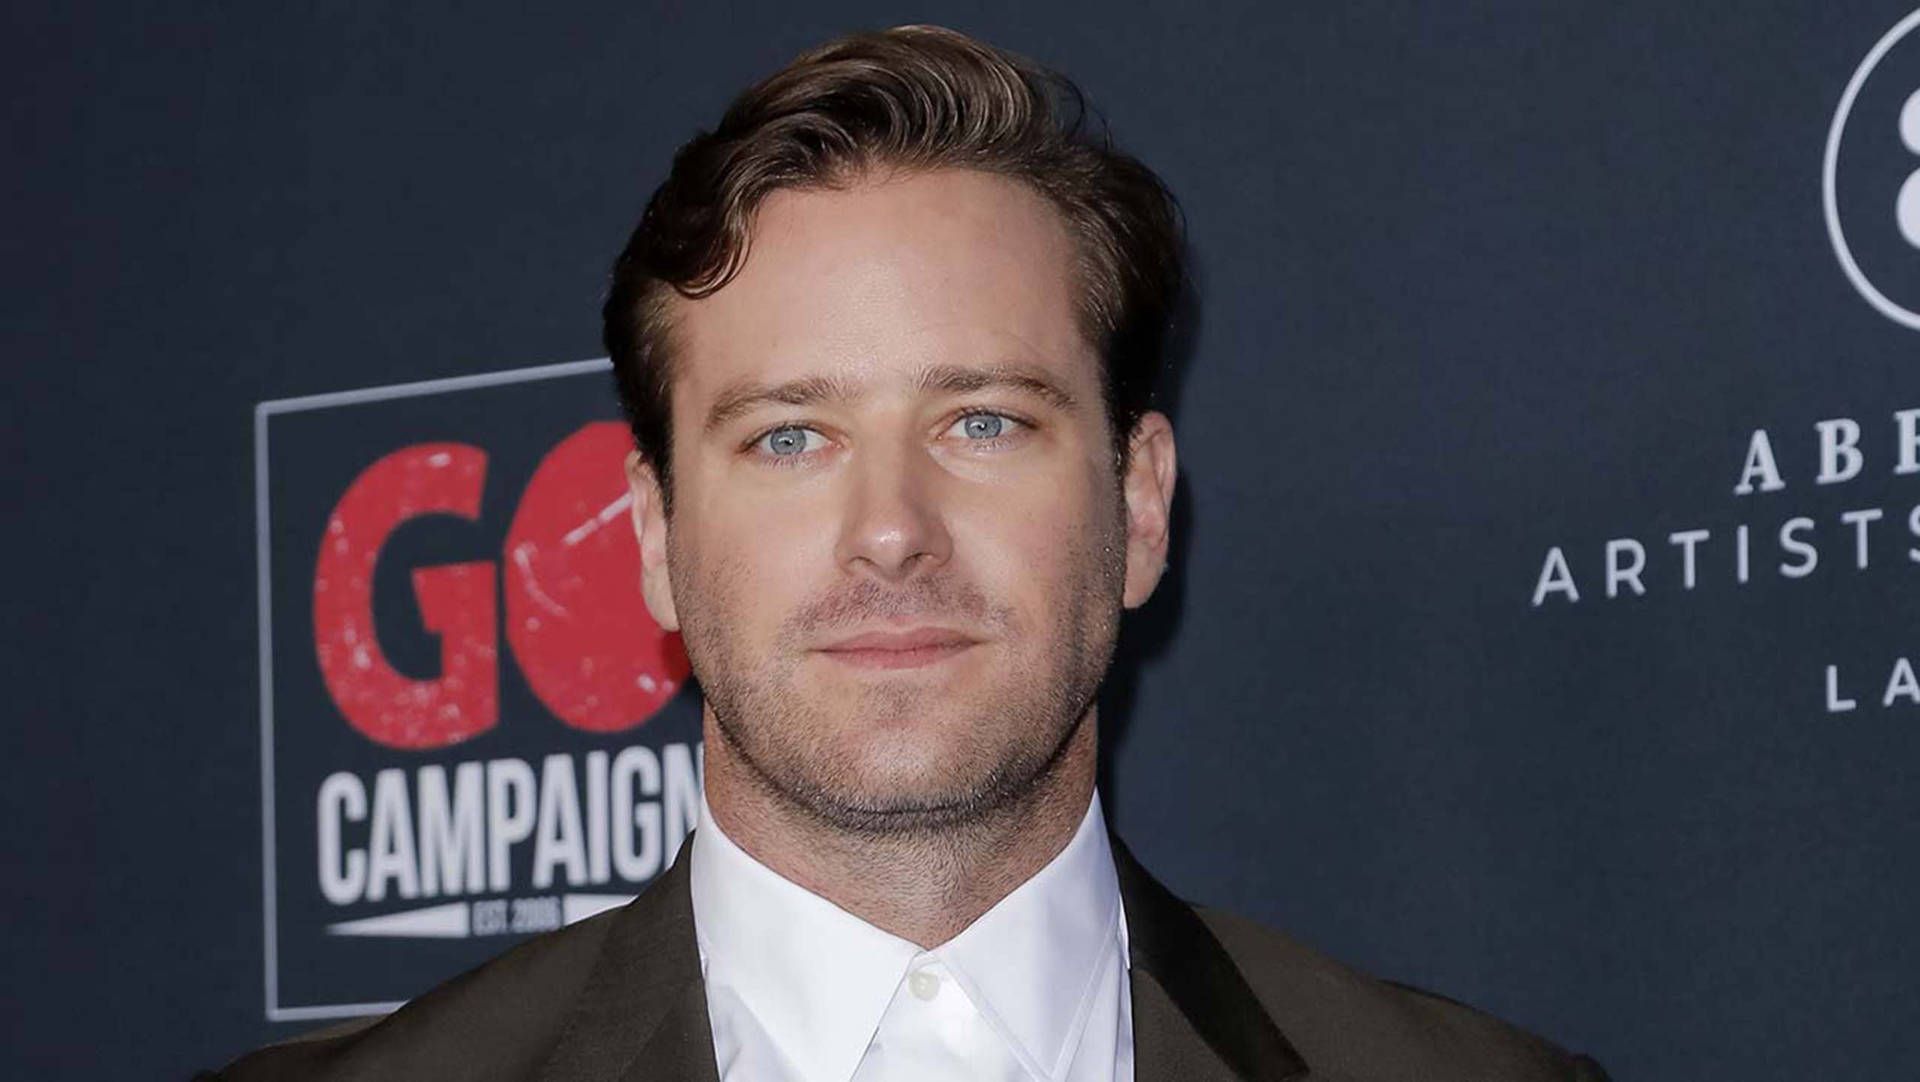 Armie Hammer Go Campaign